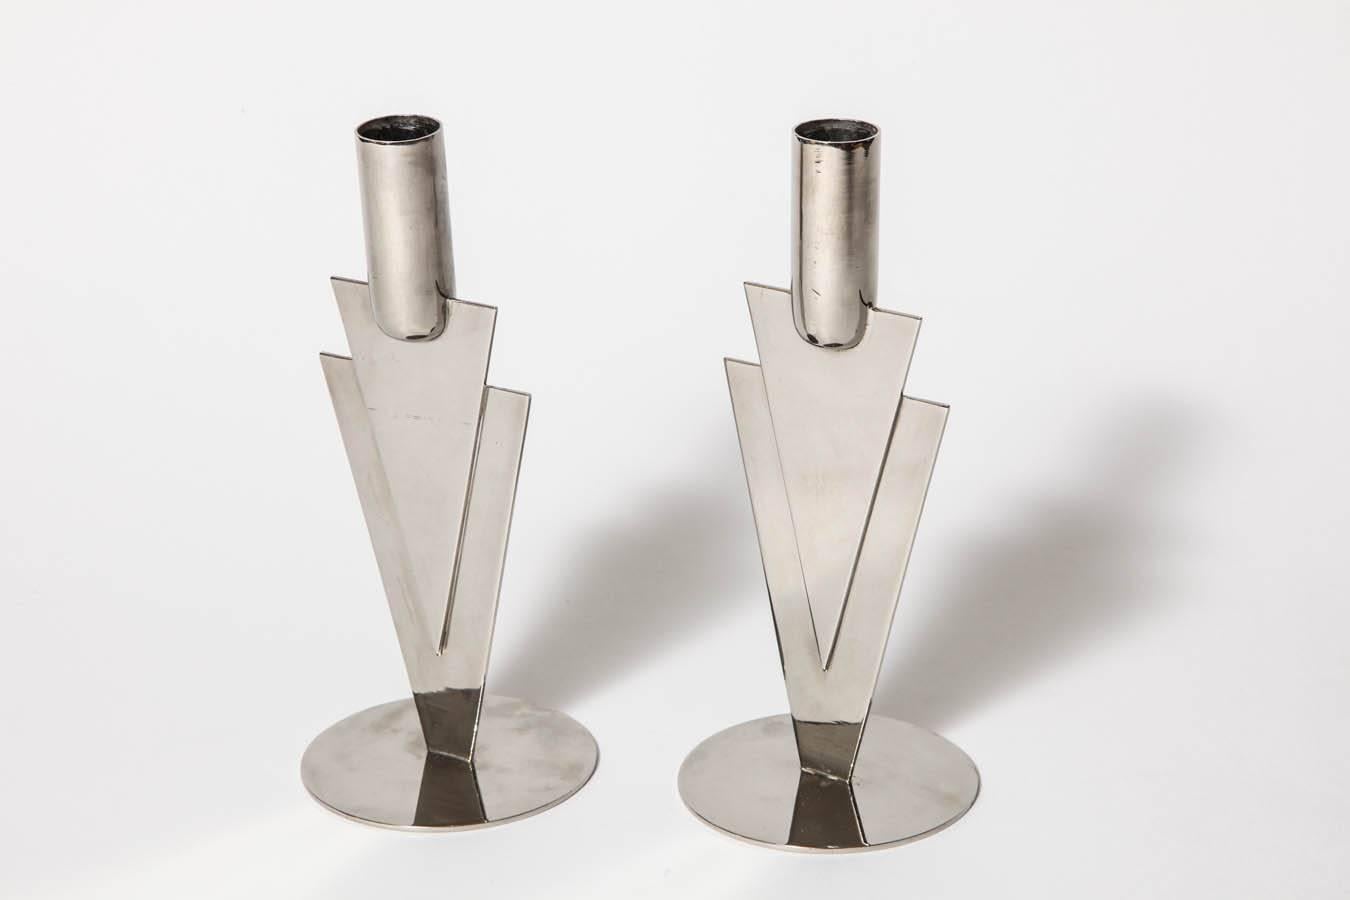 A Nickel Plated Brass Pair of Stylized Arrow Hagenauer Werkstätte Candlesticks designed by Karl Hagenauer, circa 1928. Original Finish in Mint Condition.
underside of base marked with WHW (Werkstätte Hagenauer Wien), 
HagenauerWien, Made in